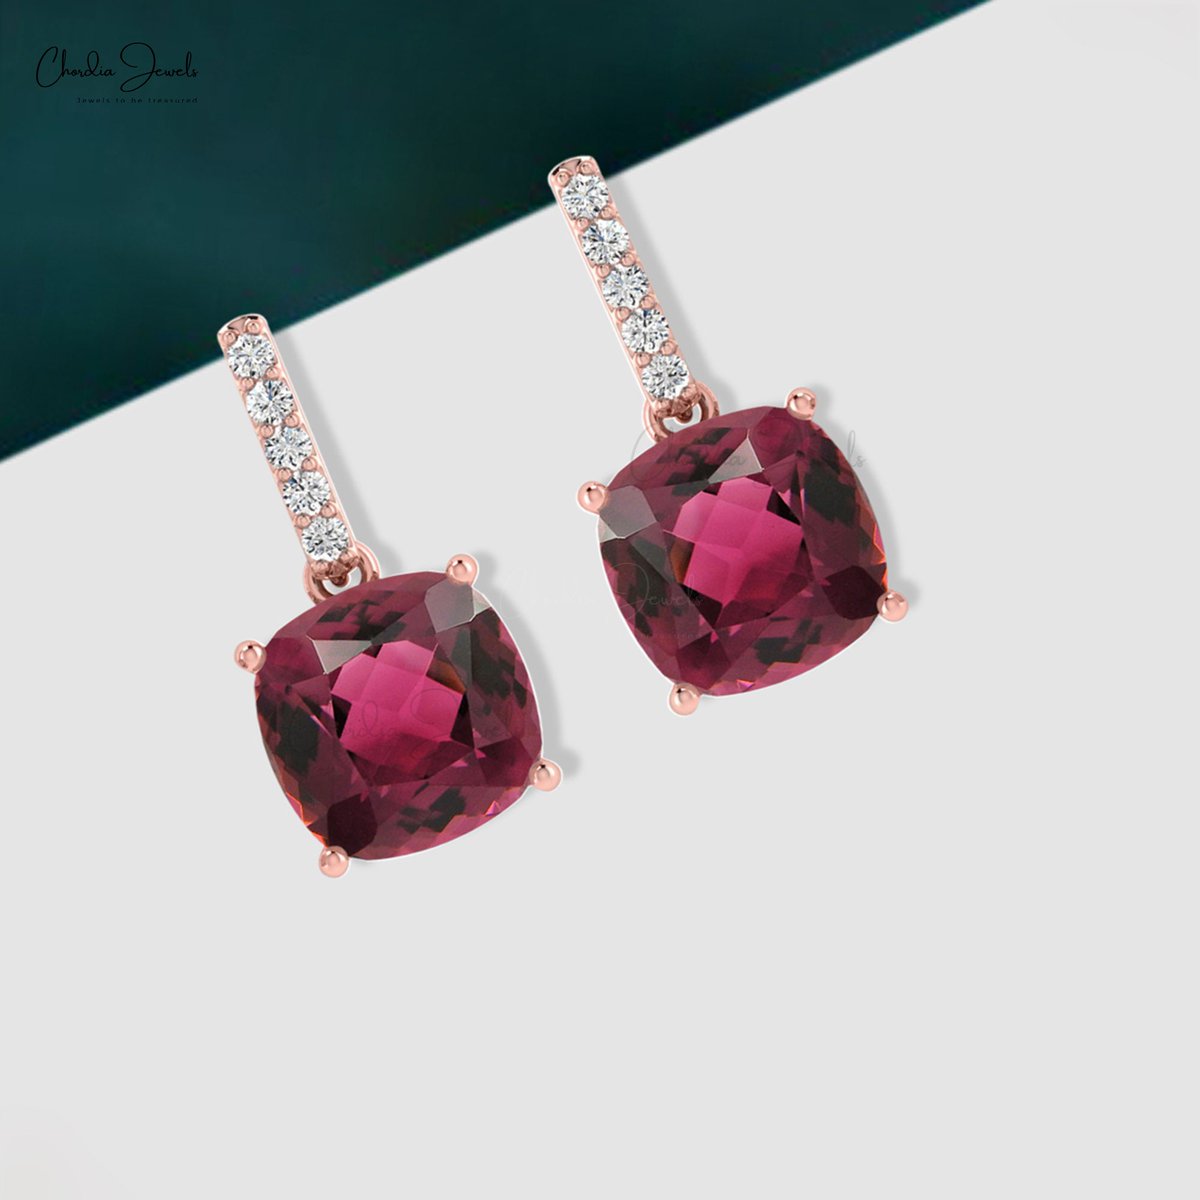 Celebrating love this Valentines Day should be effortless and beautiful. Lets pick out the perfect gift for your loved ones!
etsy.me/3oOjLwR #ValentinesDay #ChordiaJewels #TourmalineJewelry #EarringsforHer #DiamondJewelry #LoveJewelry #FineJewelry #PinkEarrings